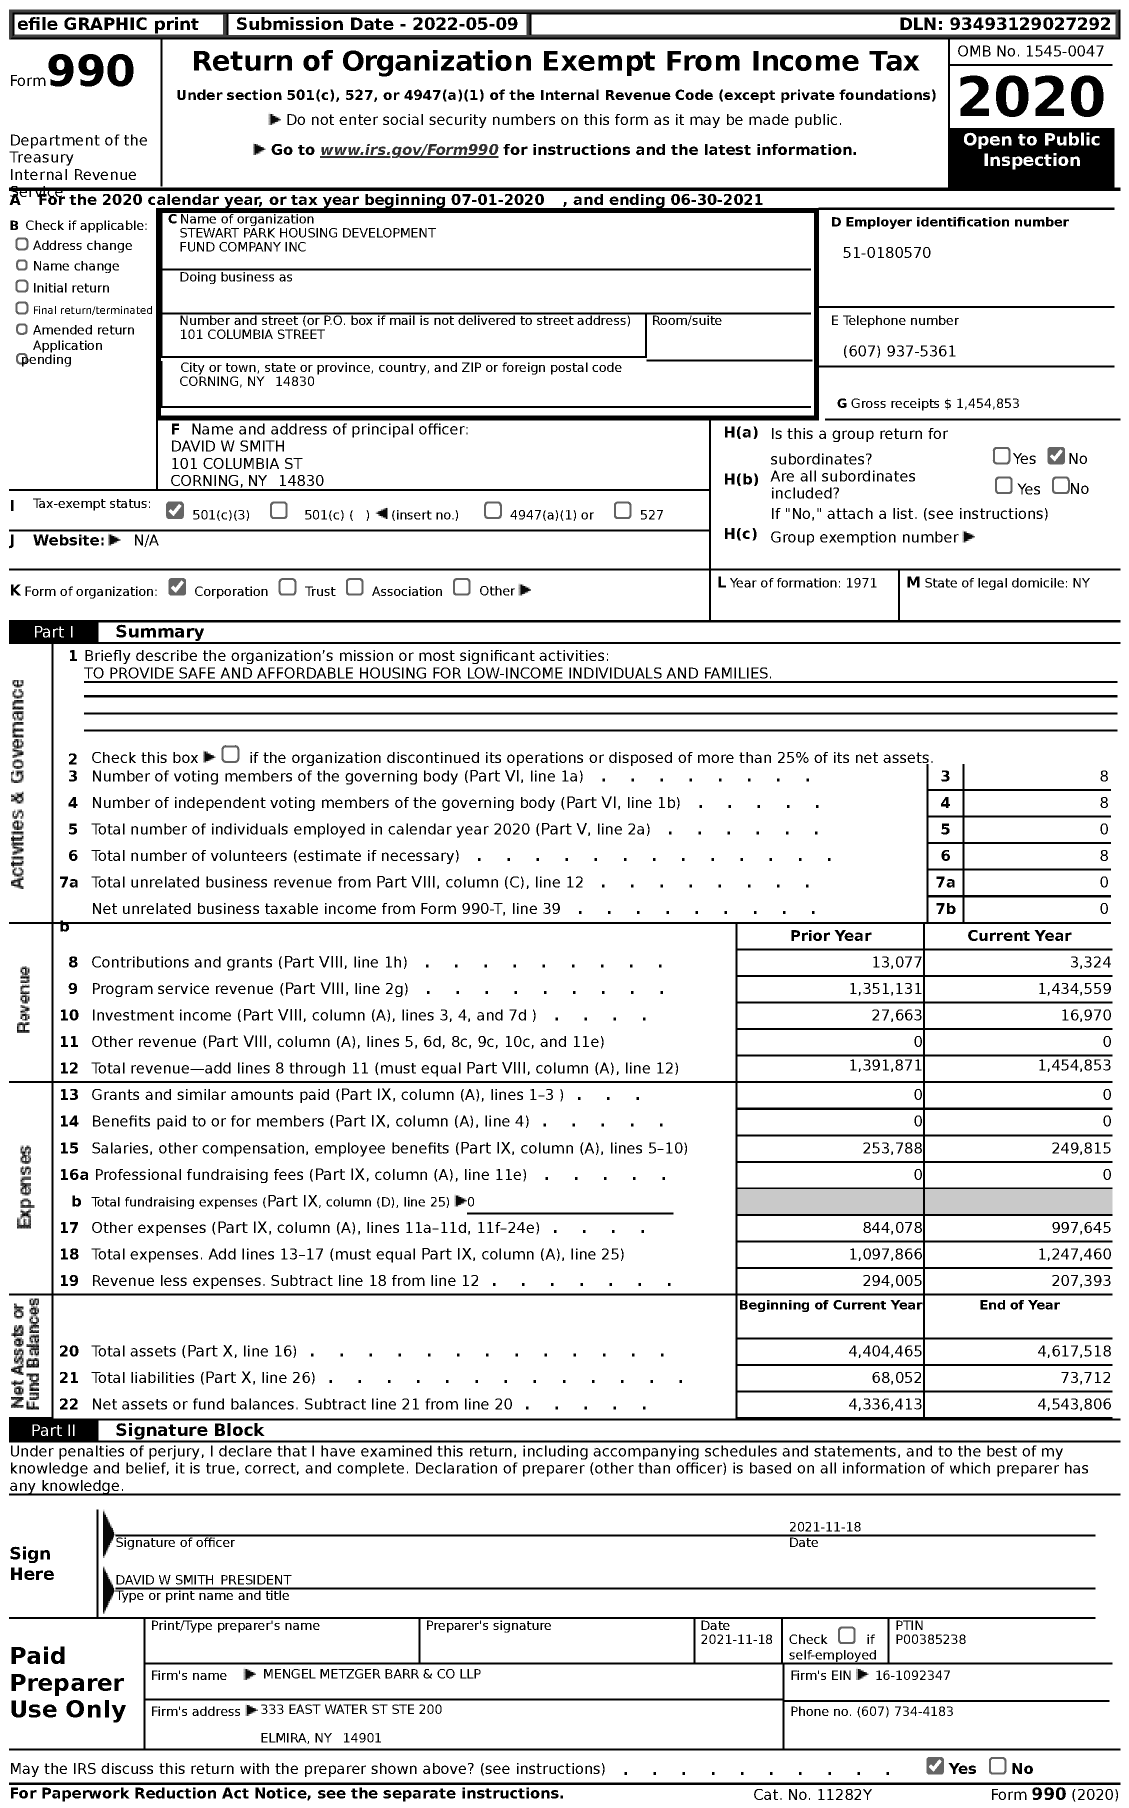 Image of first page of 2020 Form 990 for Stewart Park Housing Development Fund Company